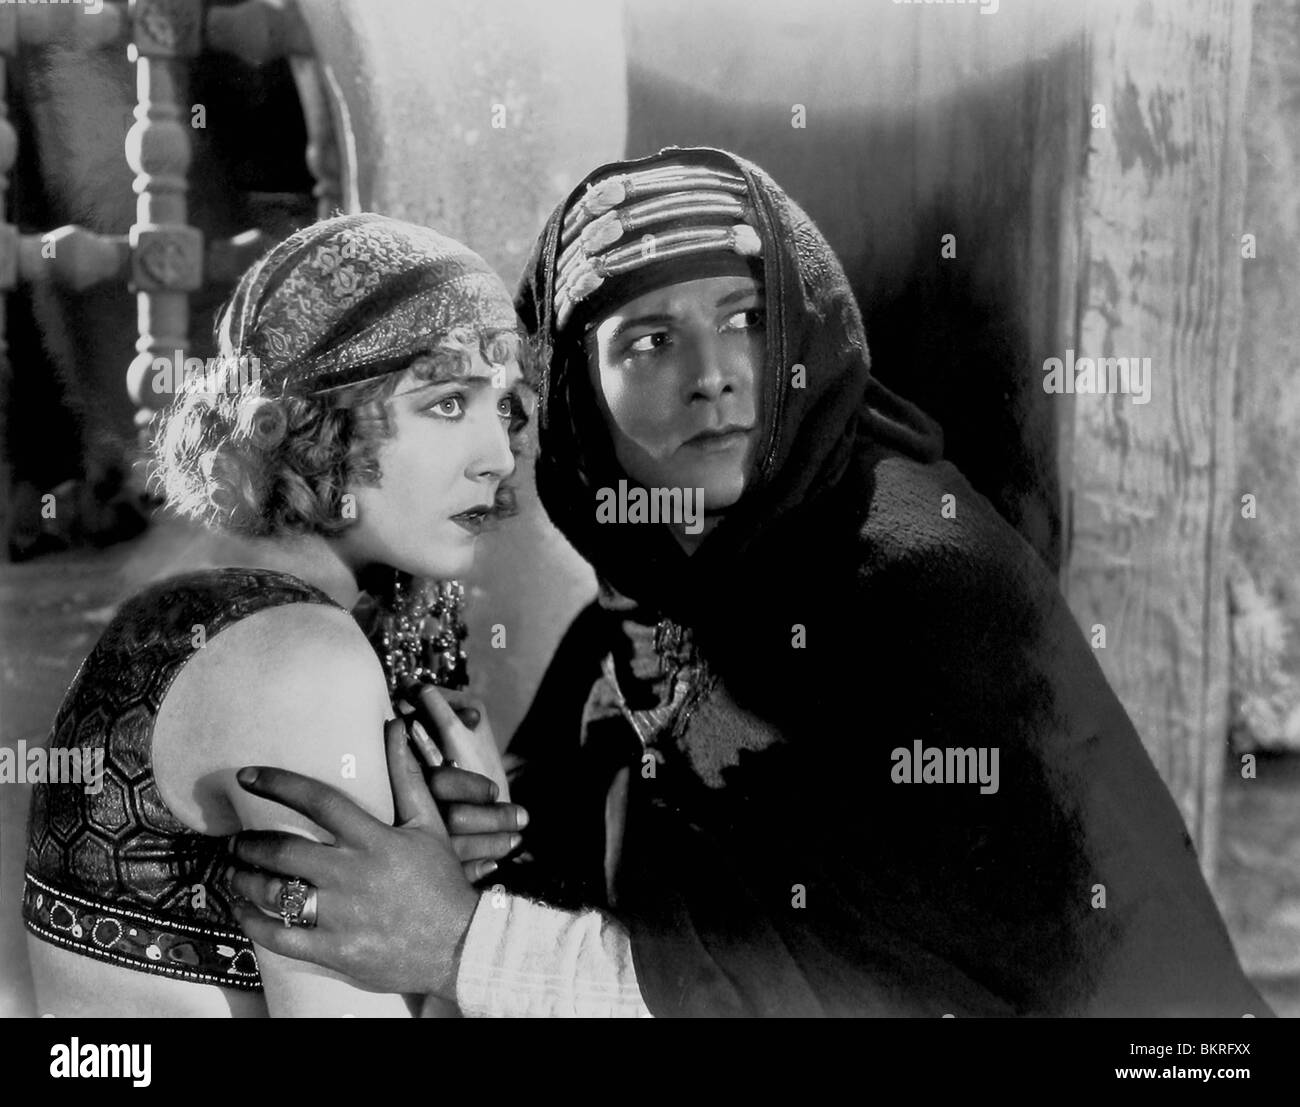 Rudolph Valentino in The Son of the Sheik